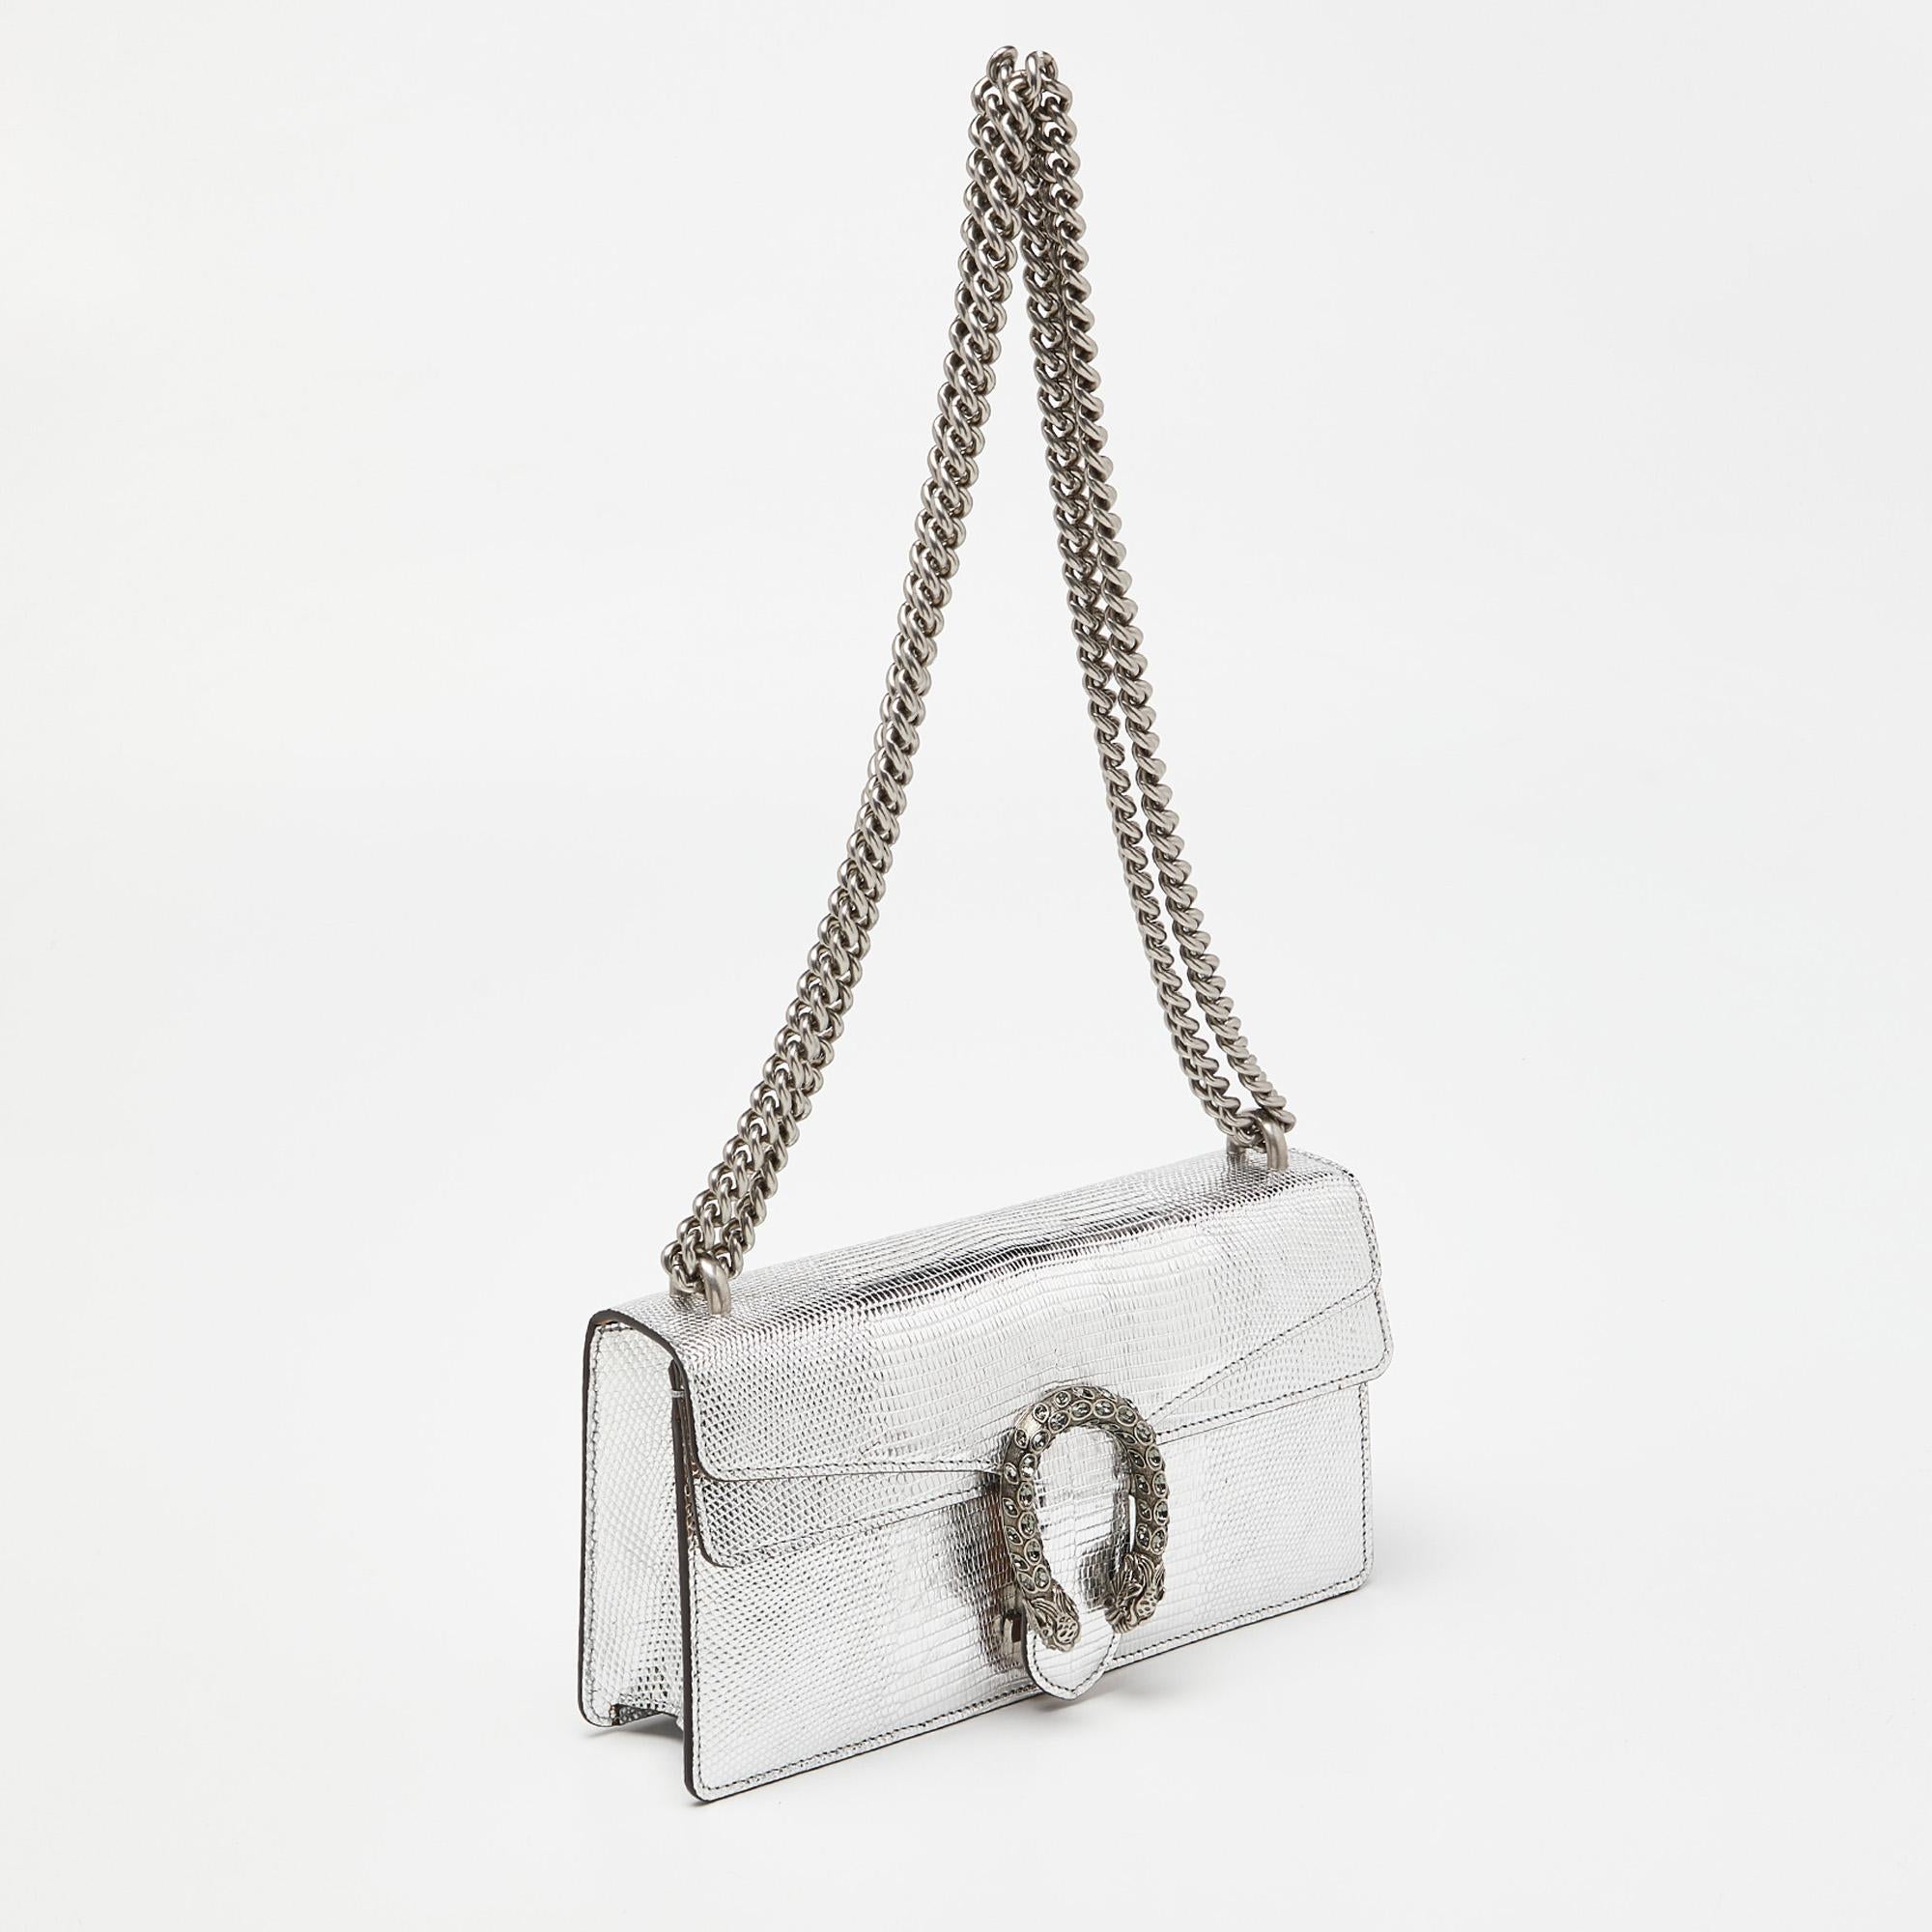 Structured, sophisticated, and stylish are some words that describe this Dionysus shoulder bag! Crafted from the best quality material, the Gucci creation is adorned with the label's signature appeal and equipped with a well-spaced interior. Carry